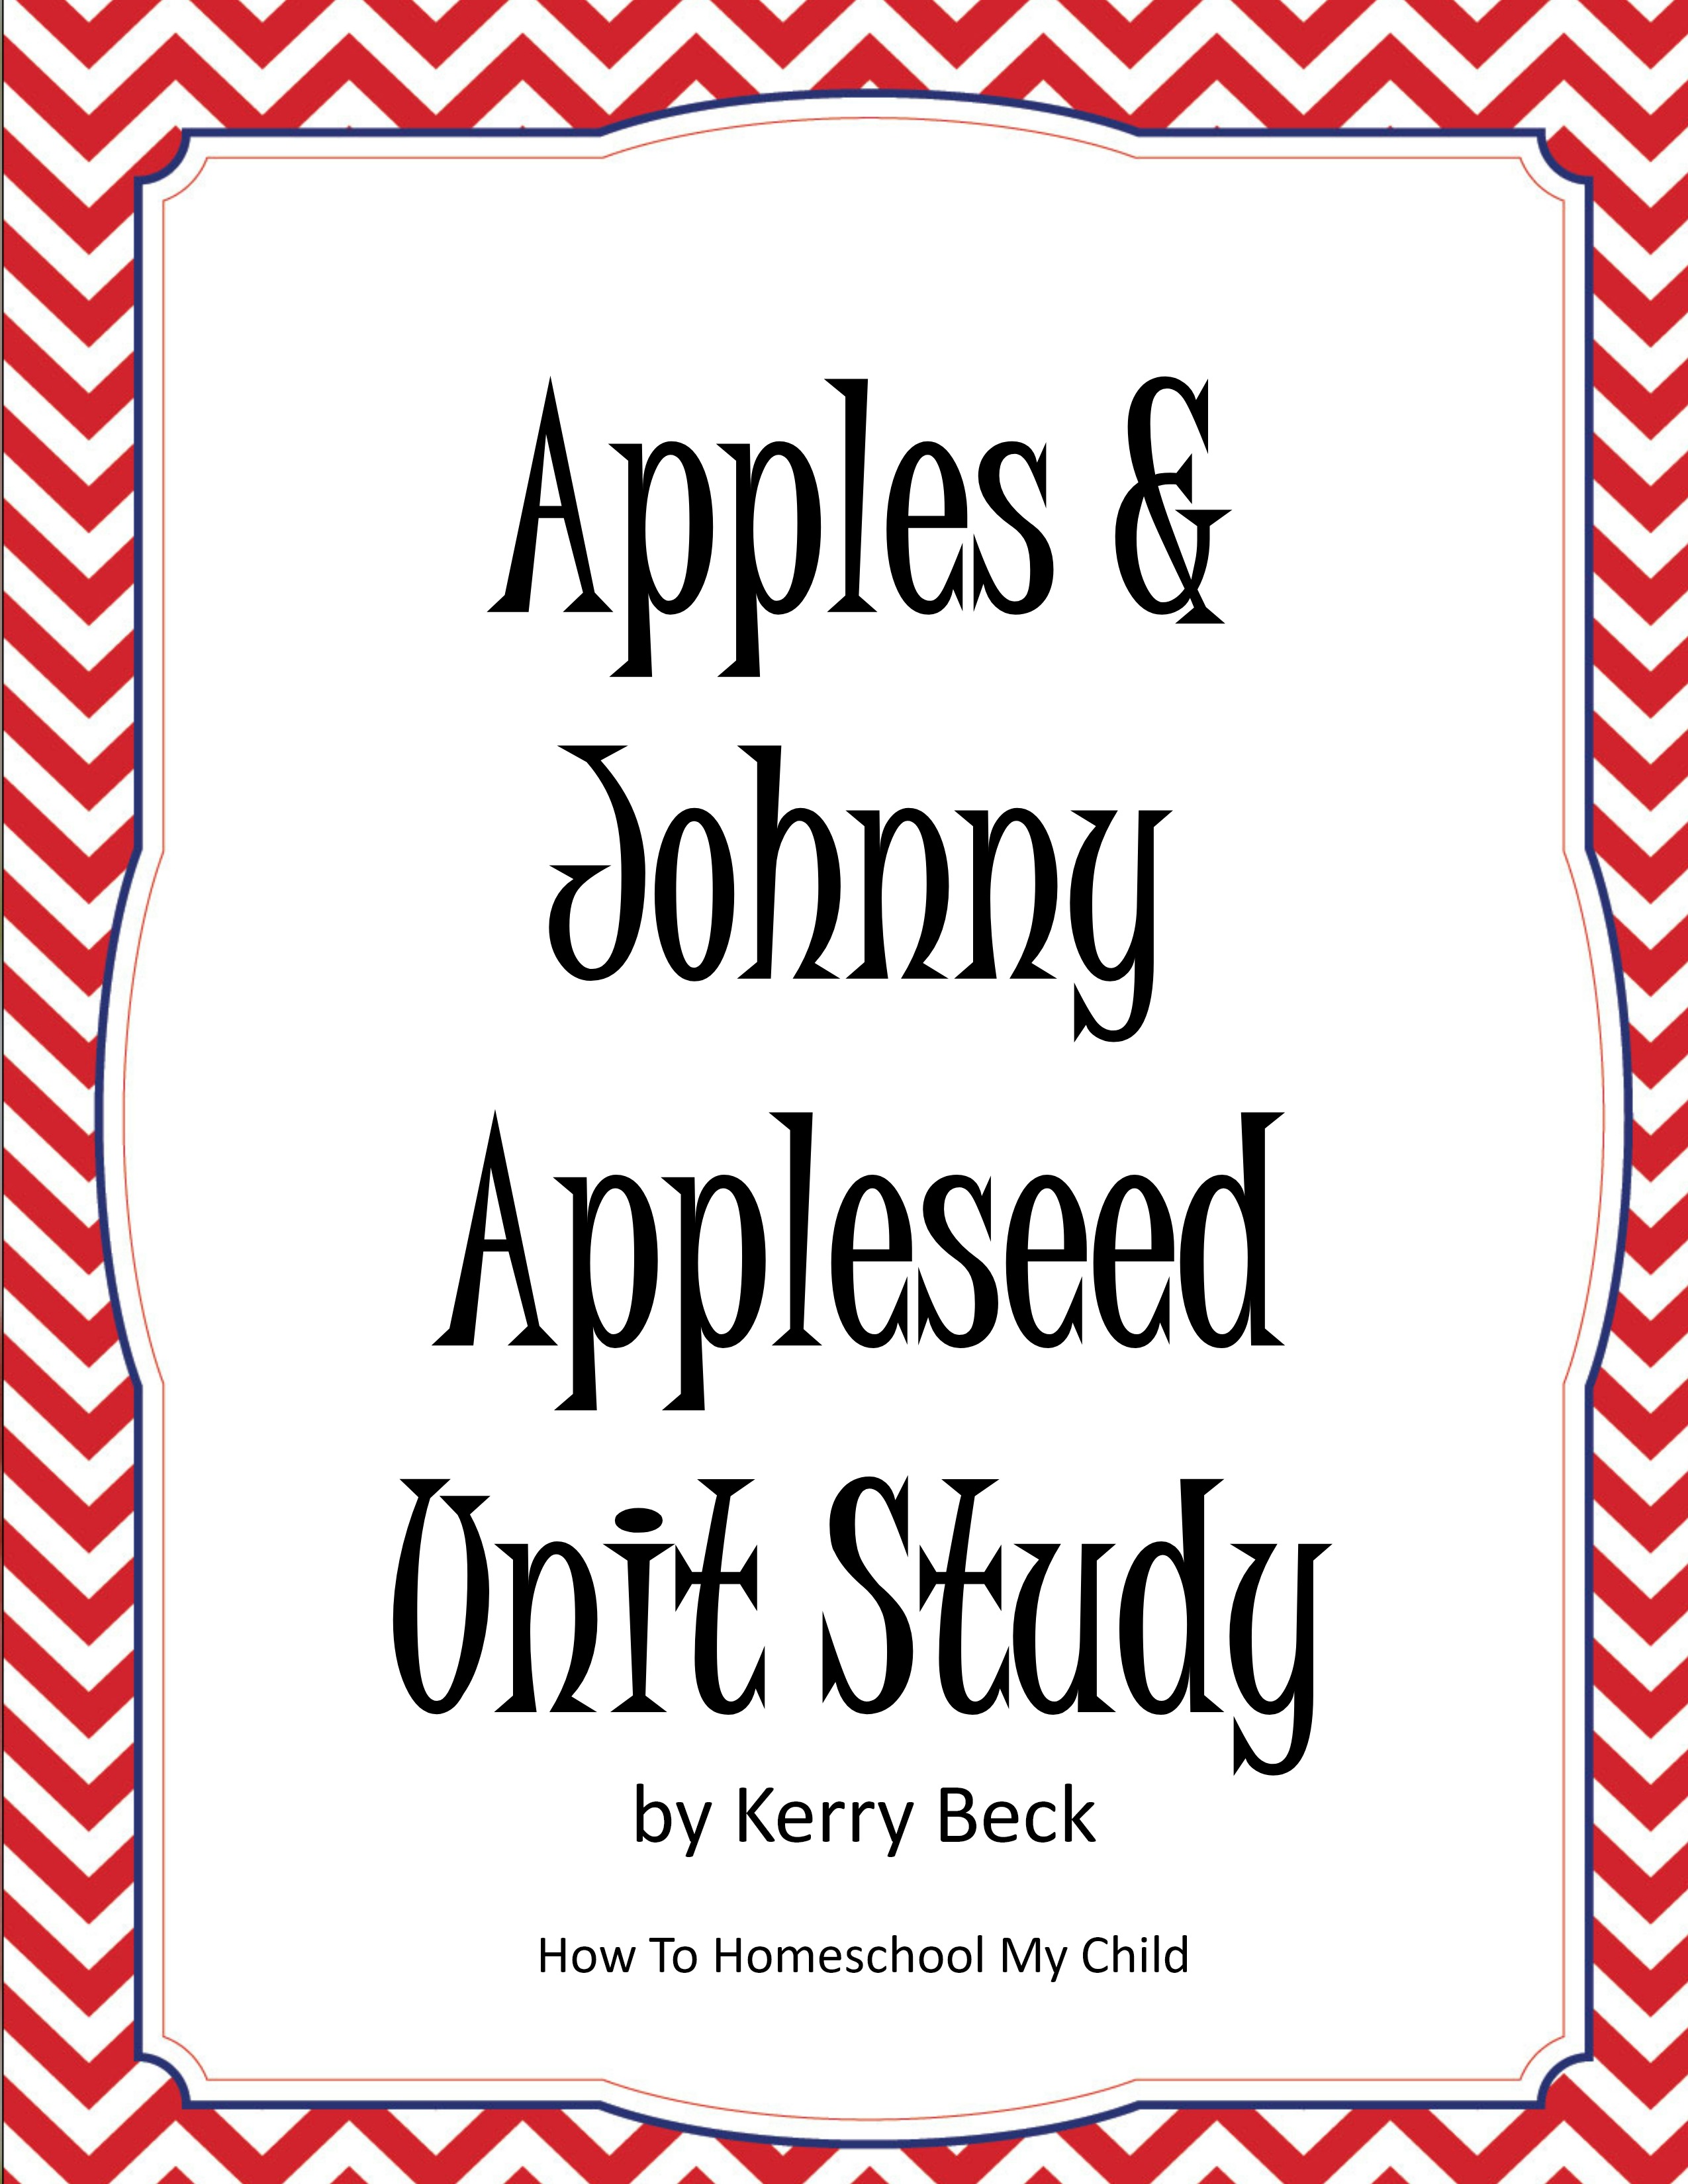 Apples & Johnny Appleseed Unit Study